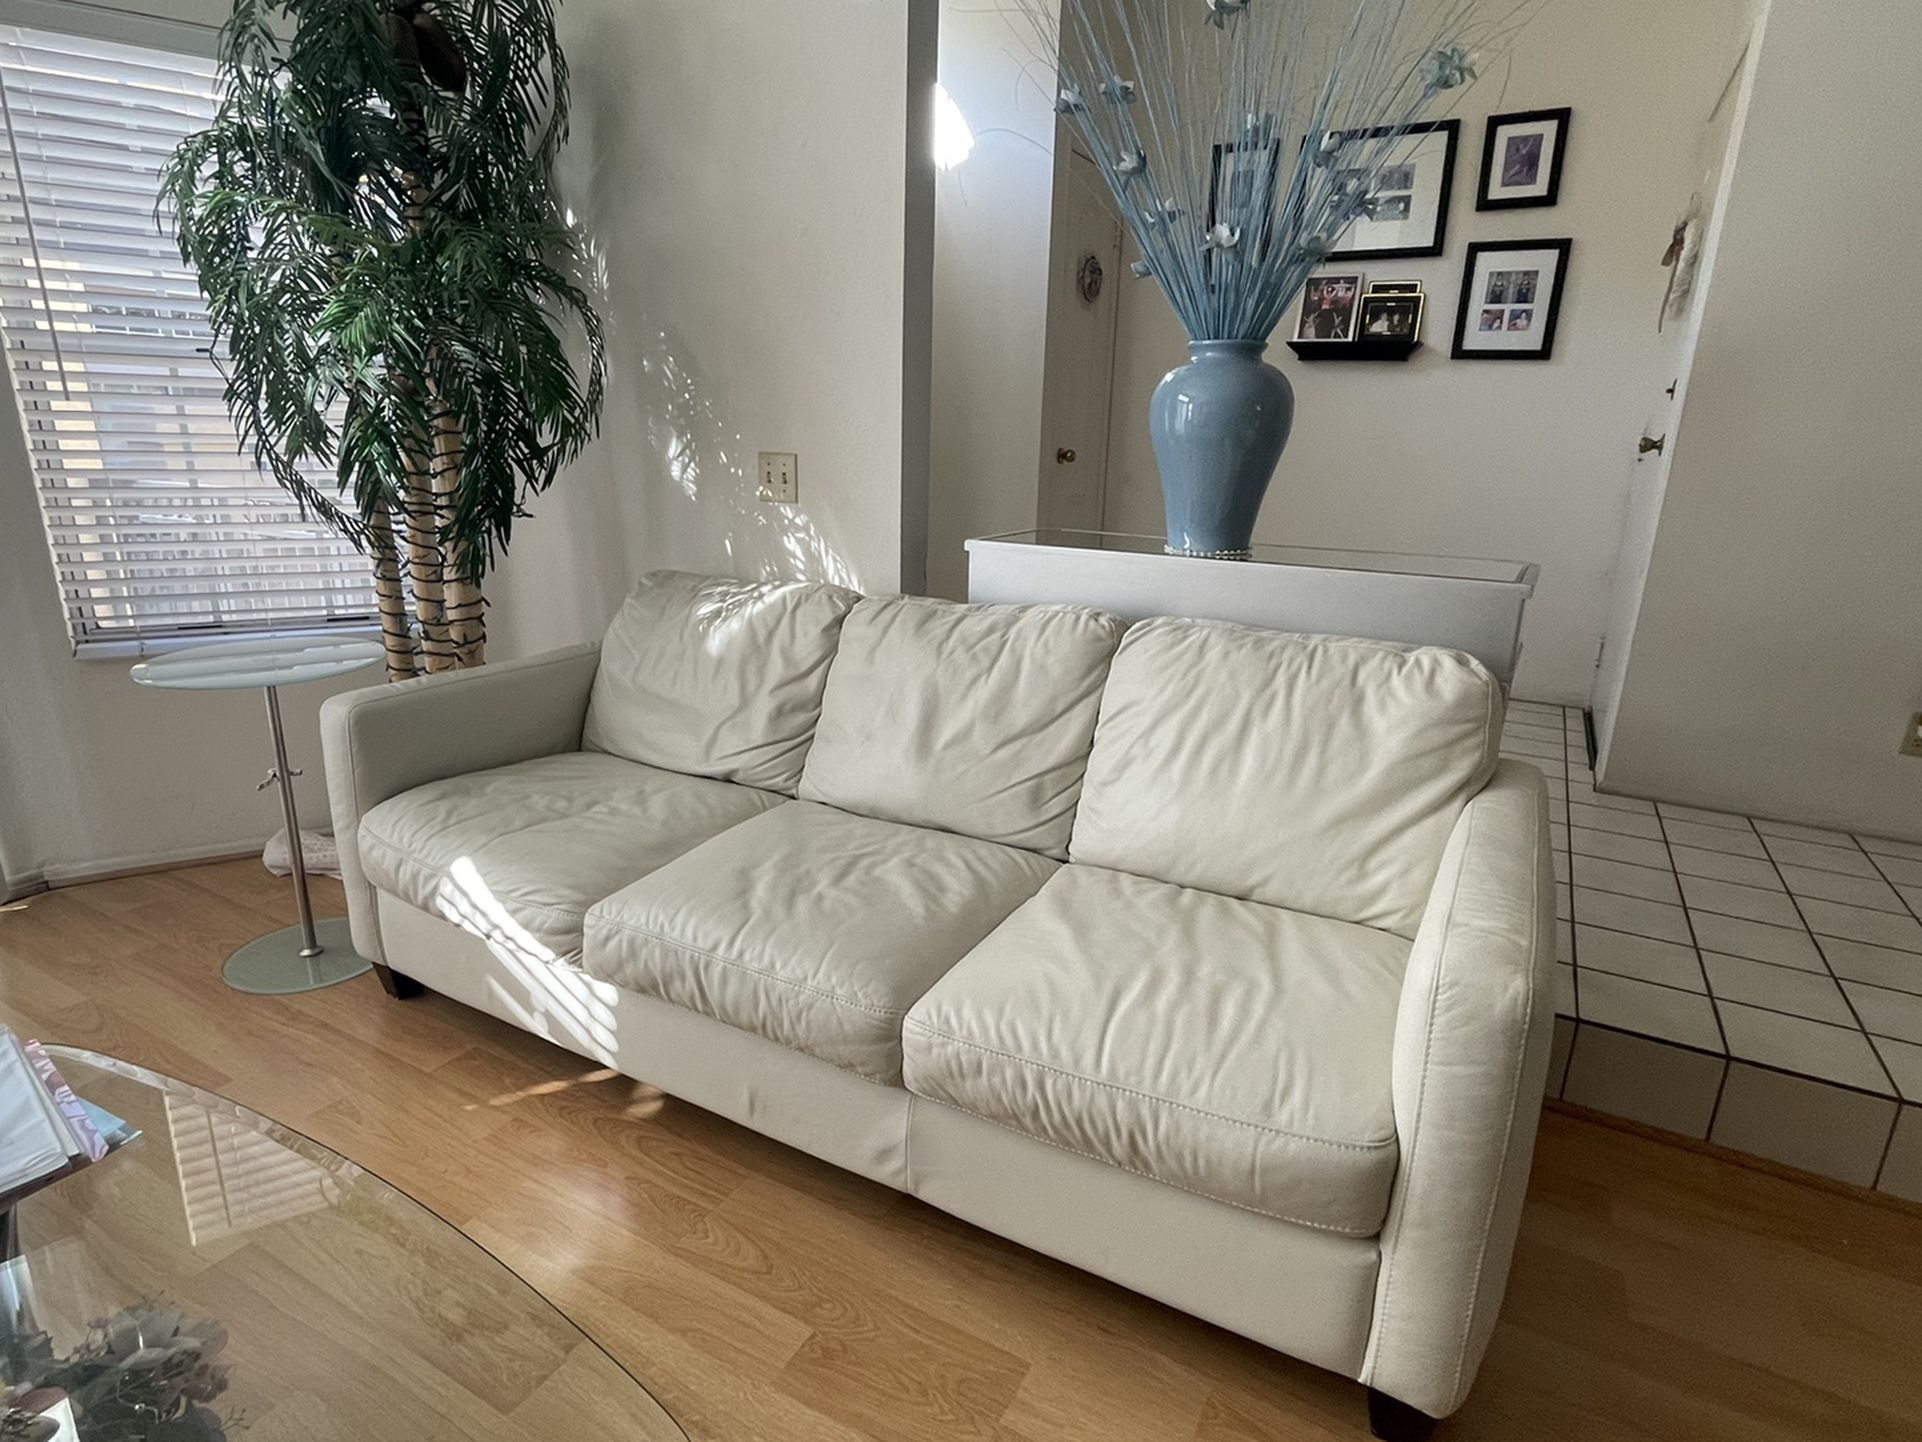 Sleek White Leather Couch